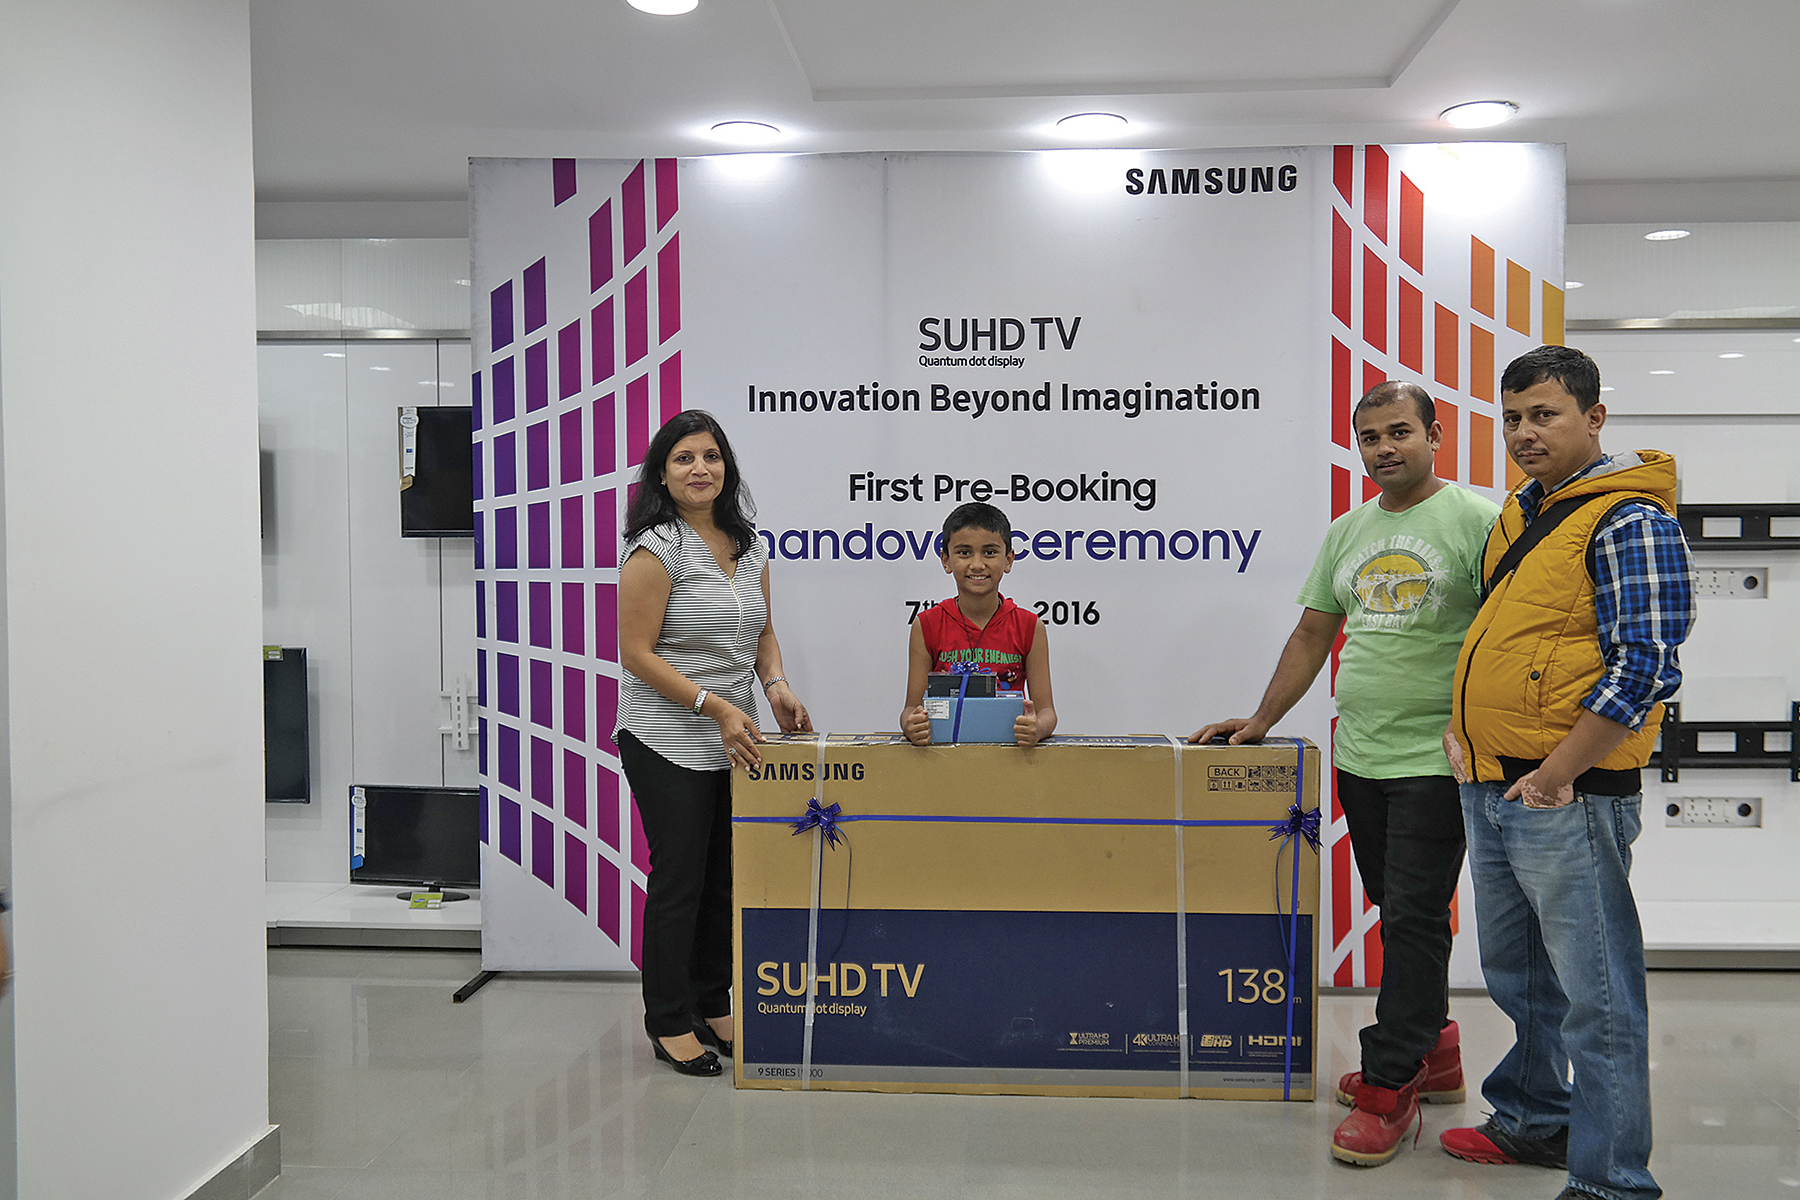 Samsung SUHD TV Handed Over To First Pre-Booker